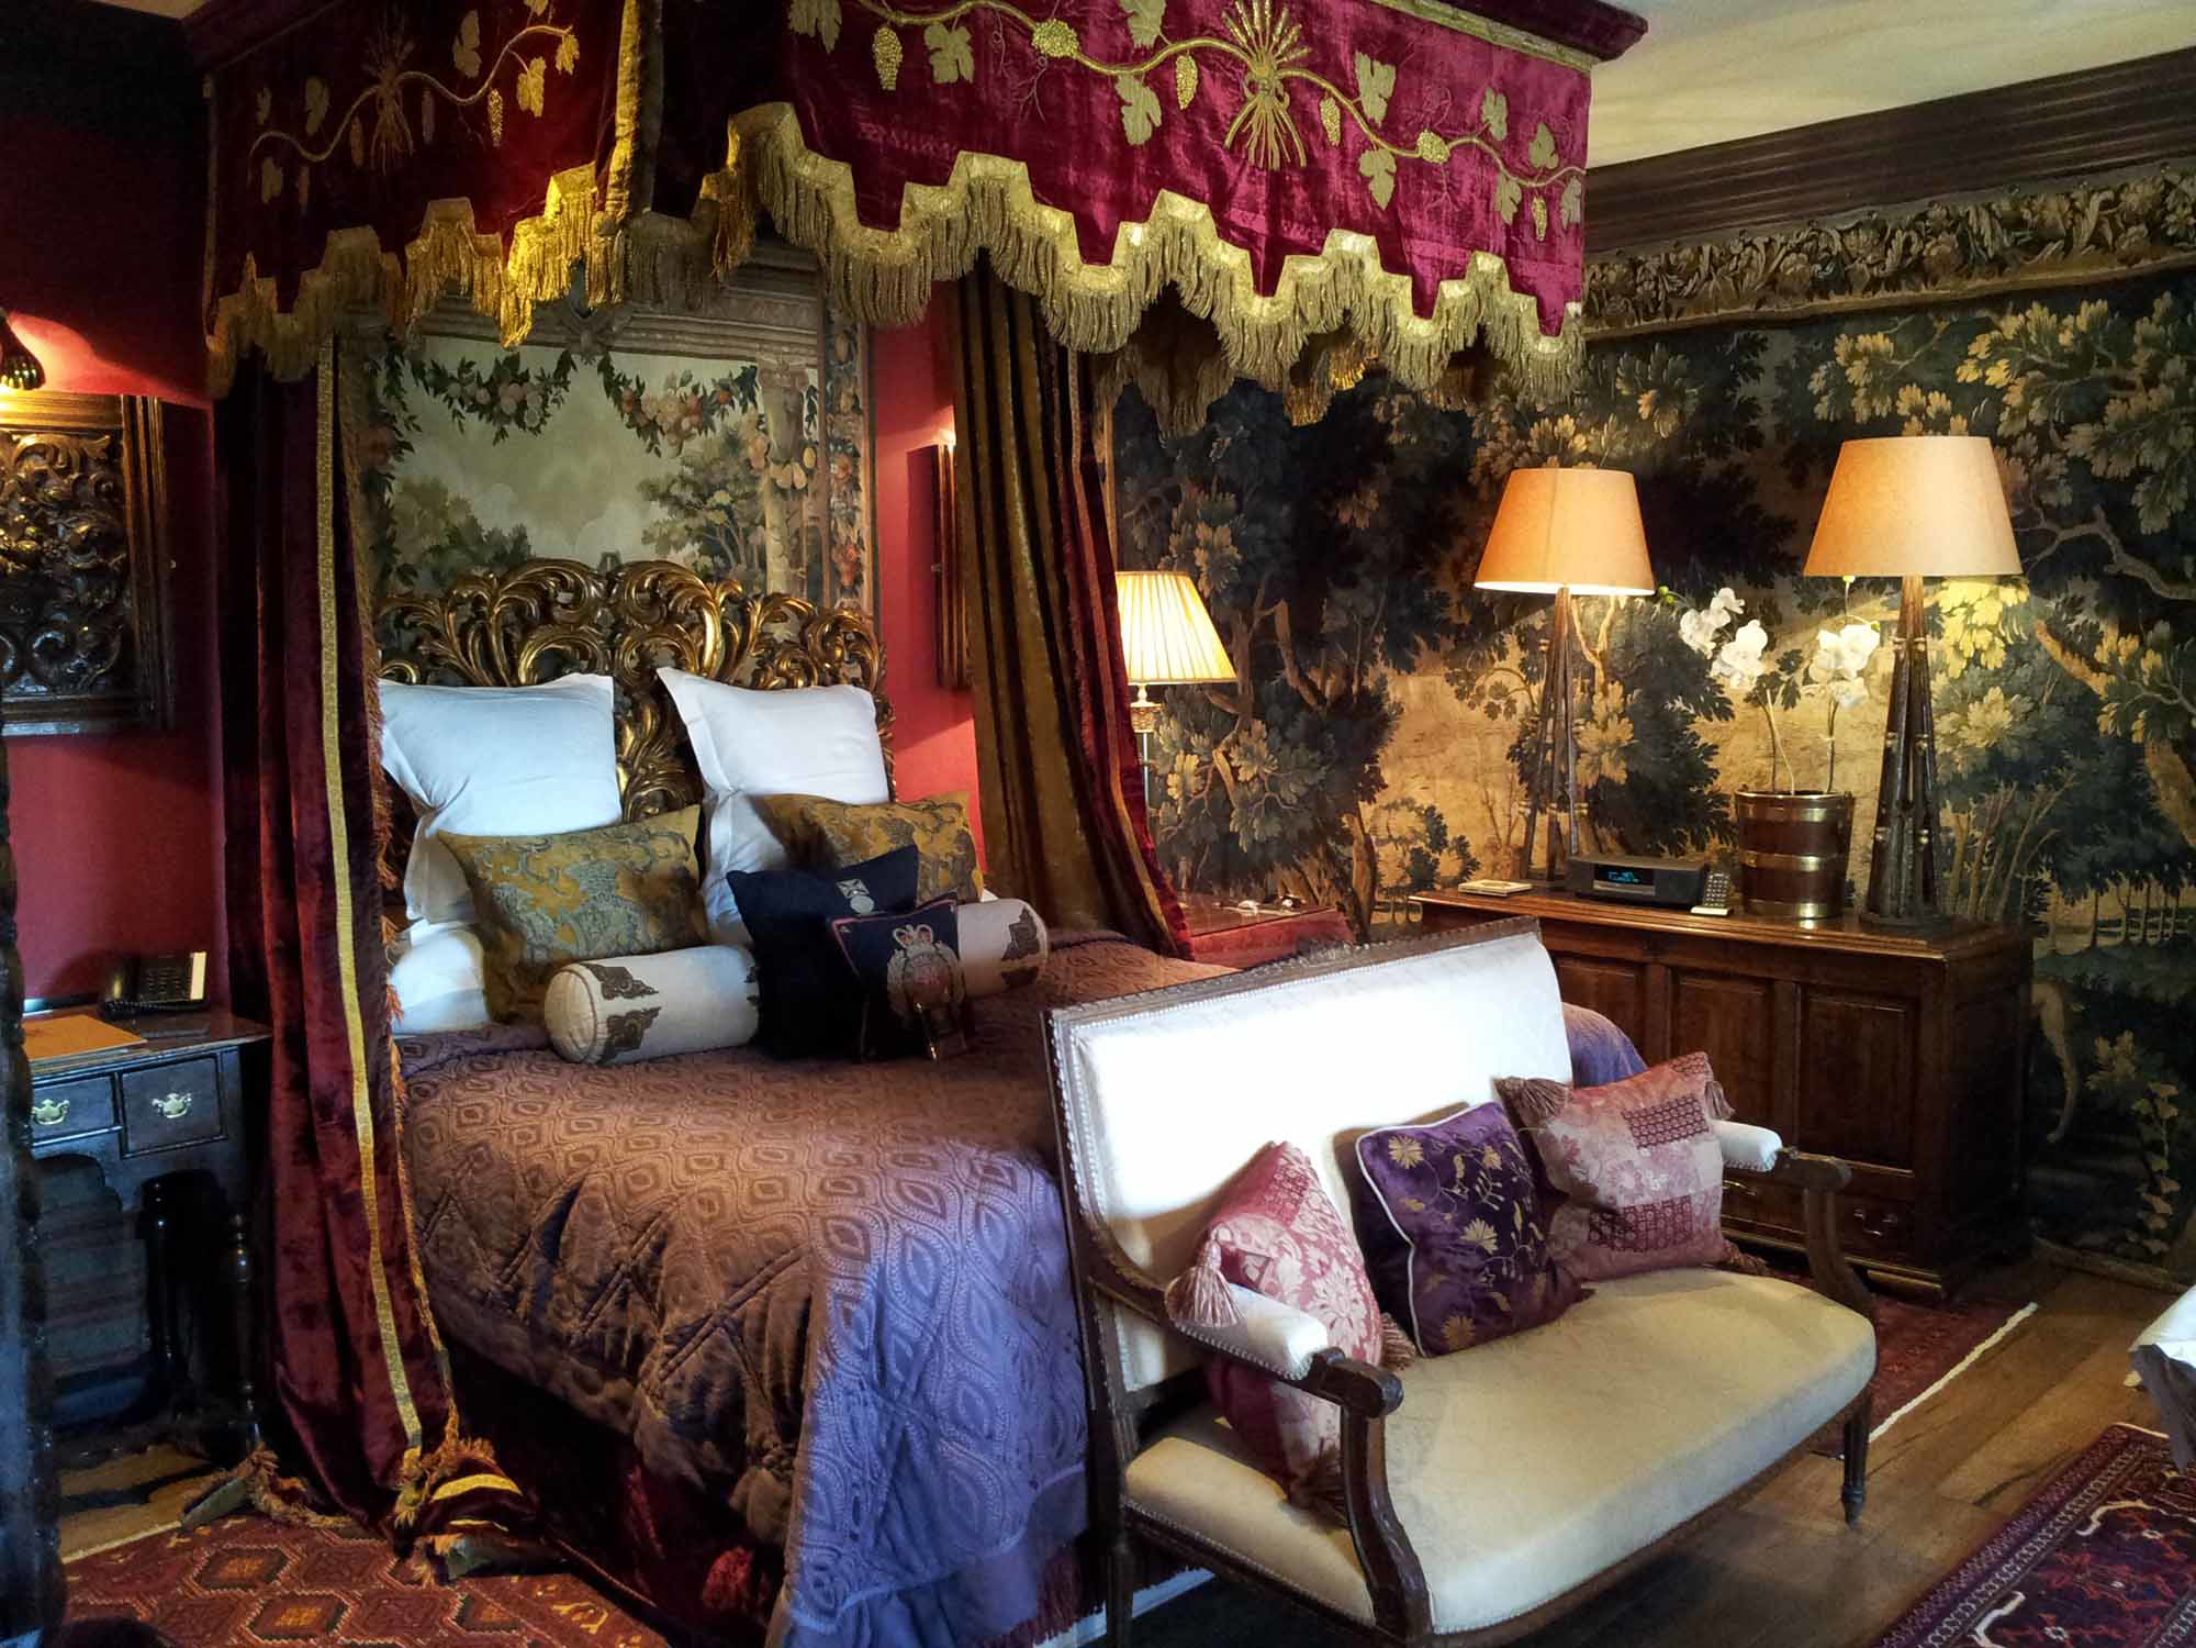 Best Hotels in Edinburgh - The Witchery by the Castle